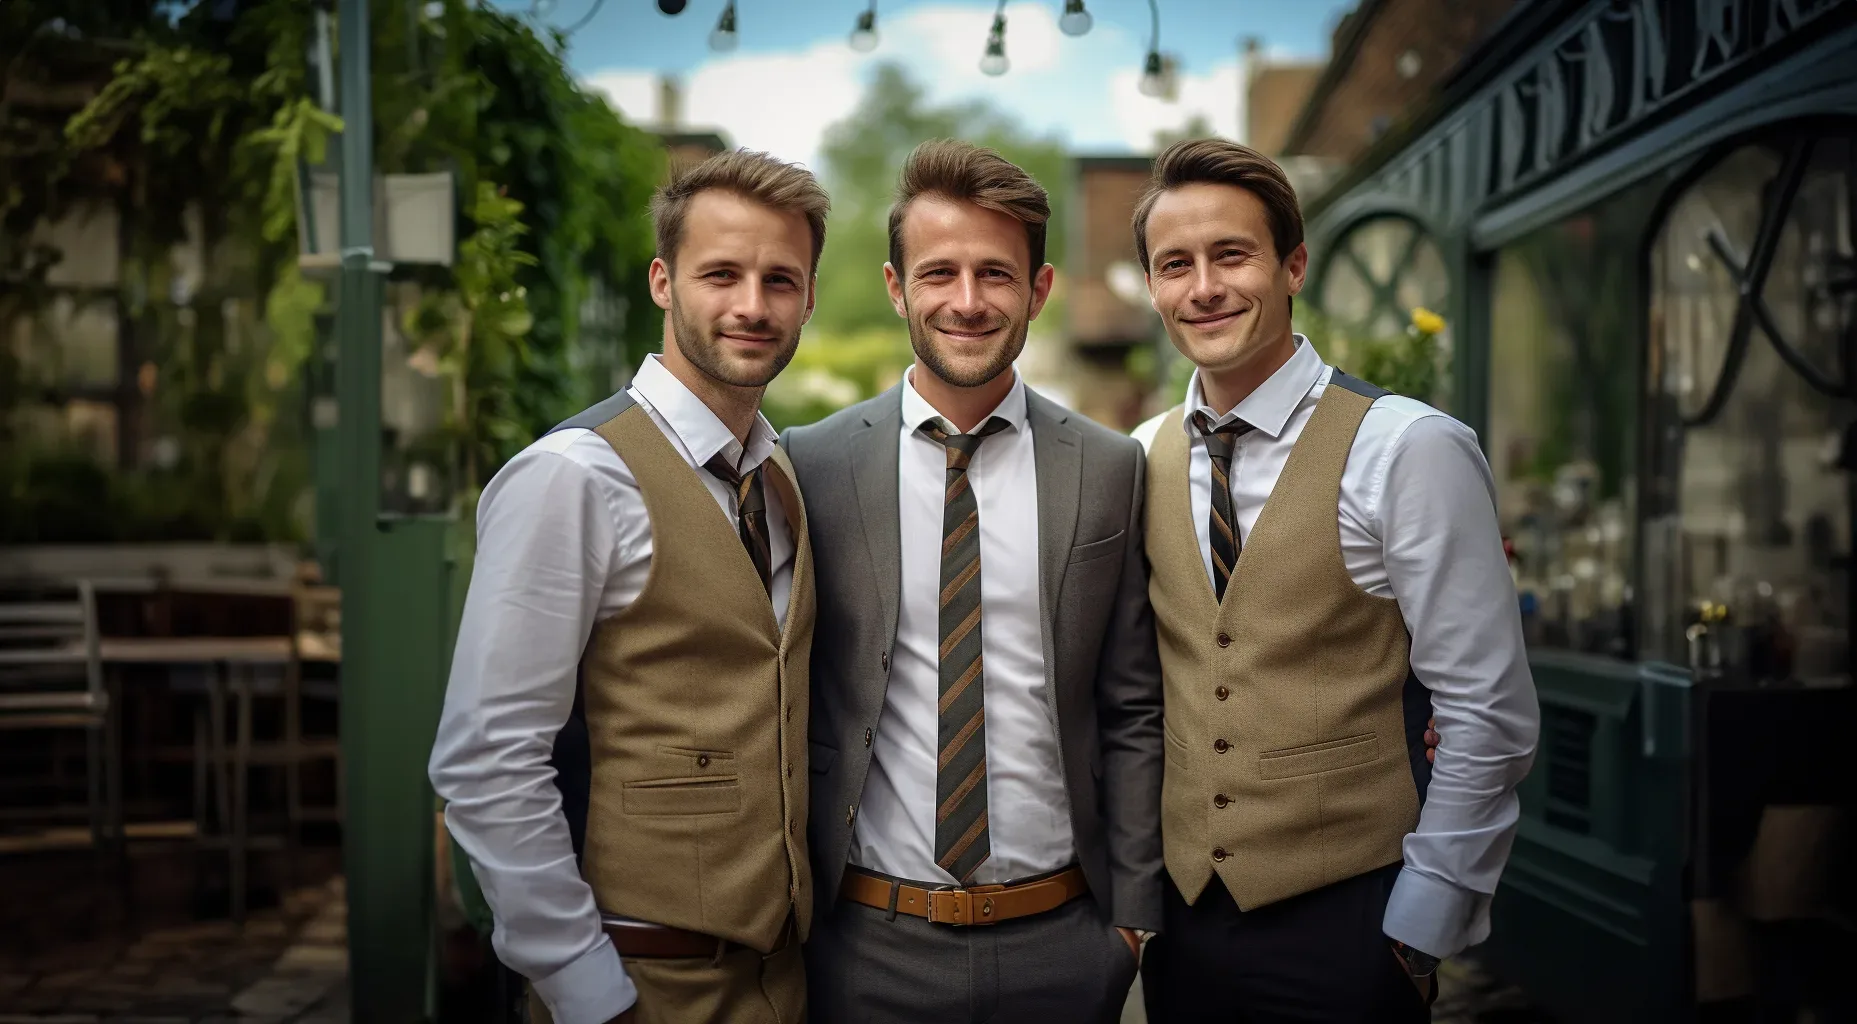 Three men in vests posing for a photo.